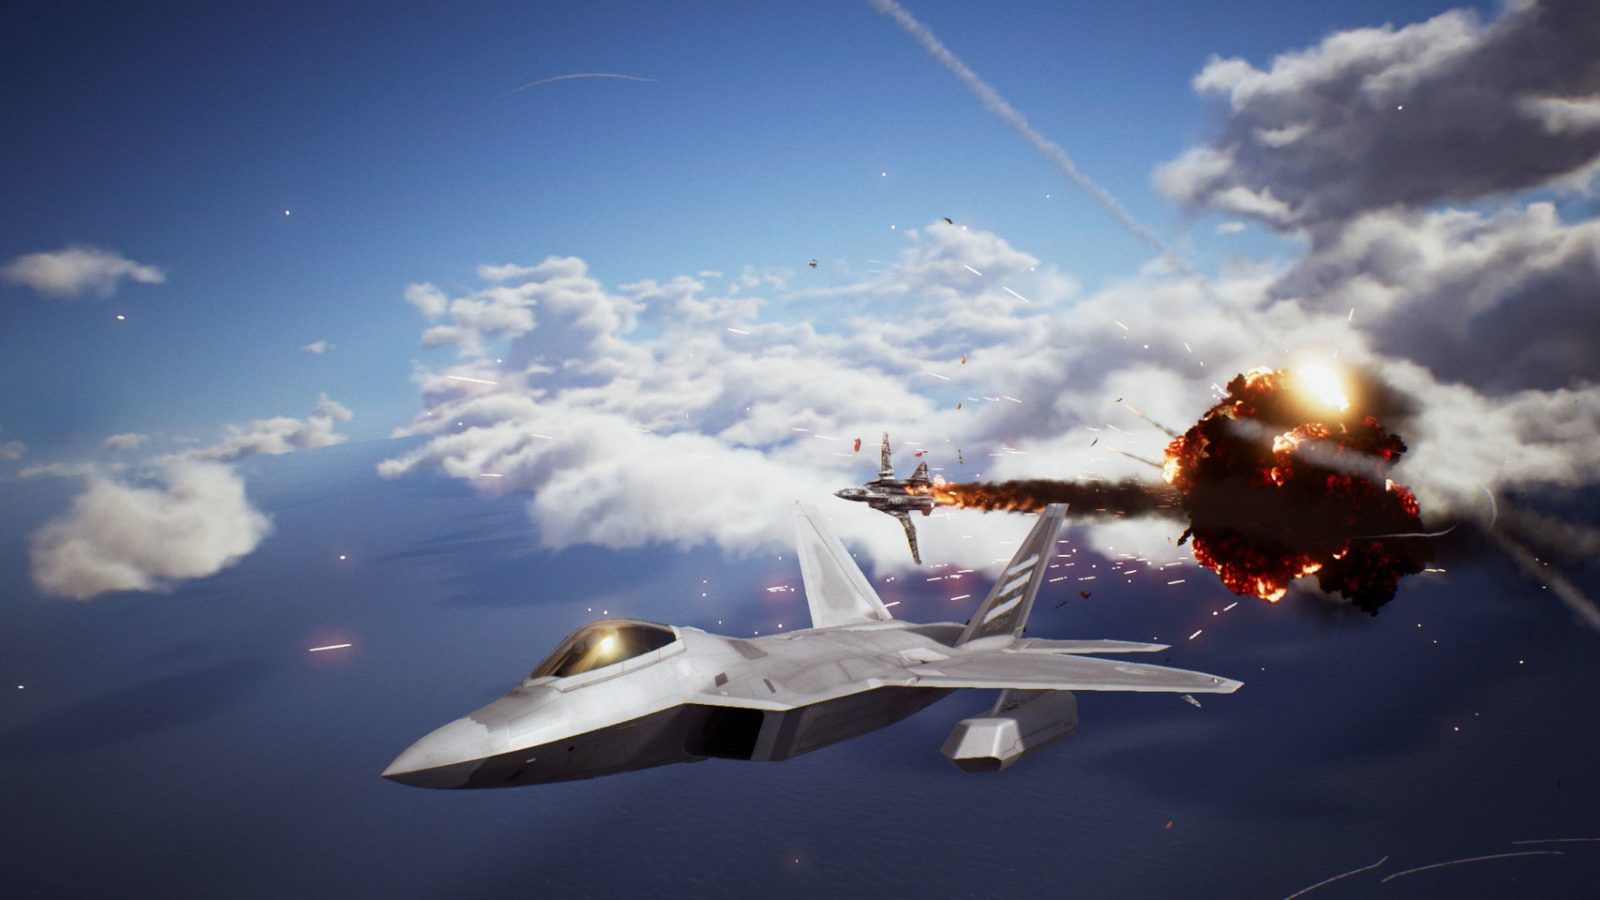 Ace Combat 7: Skies Unknown System Requirements